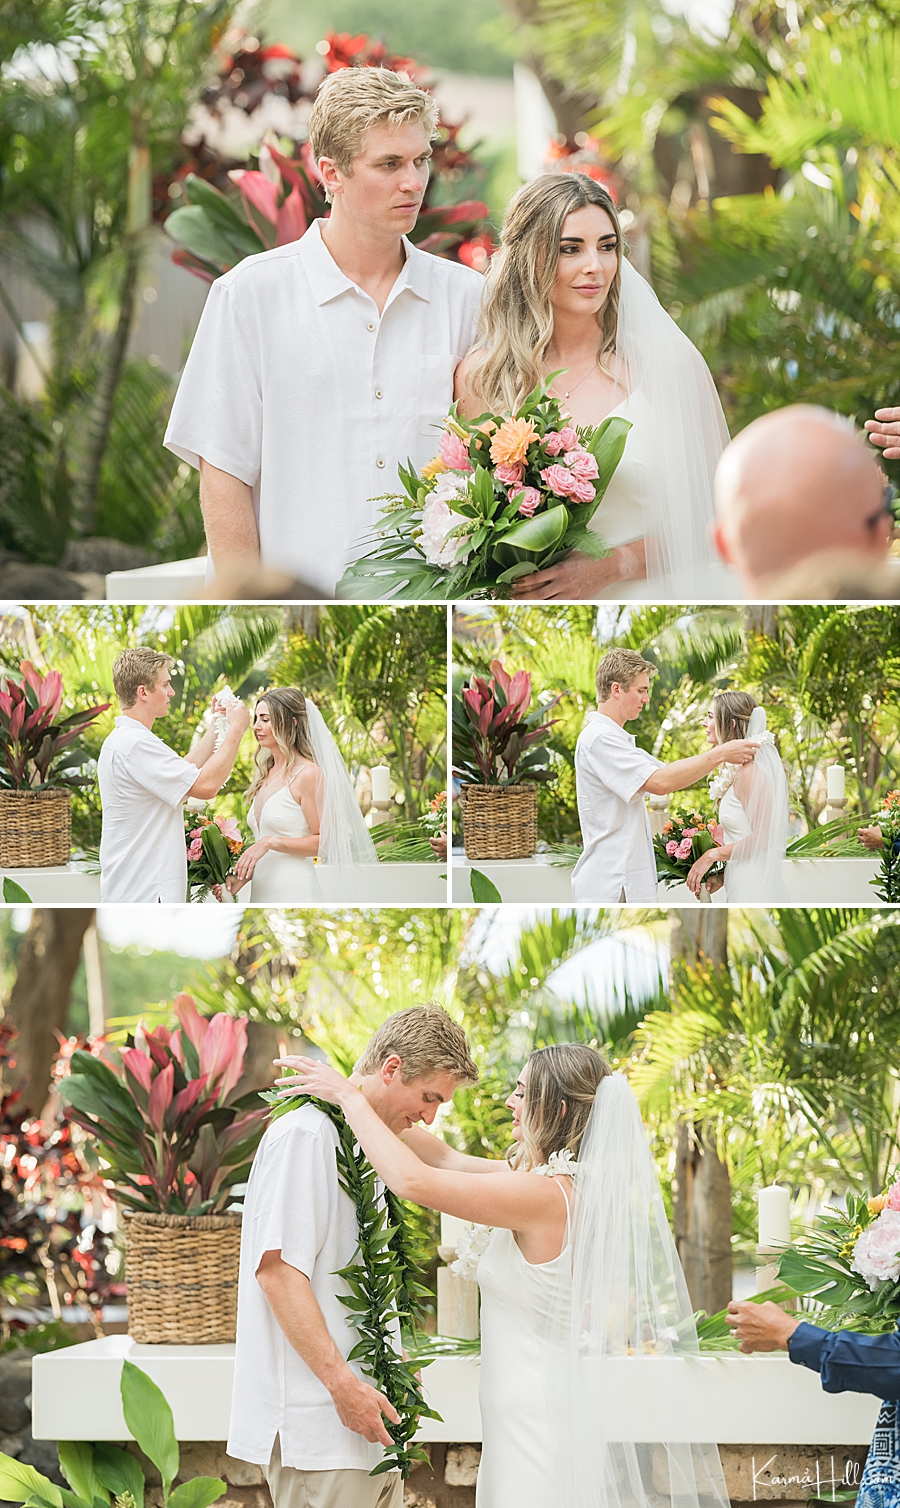 Tropical setting for a wedding in Maui